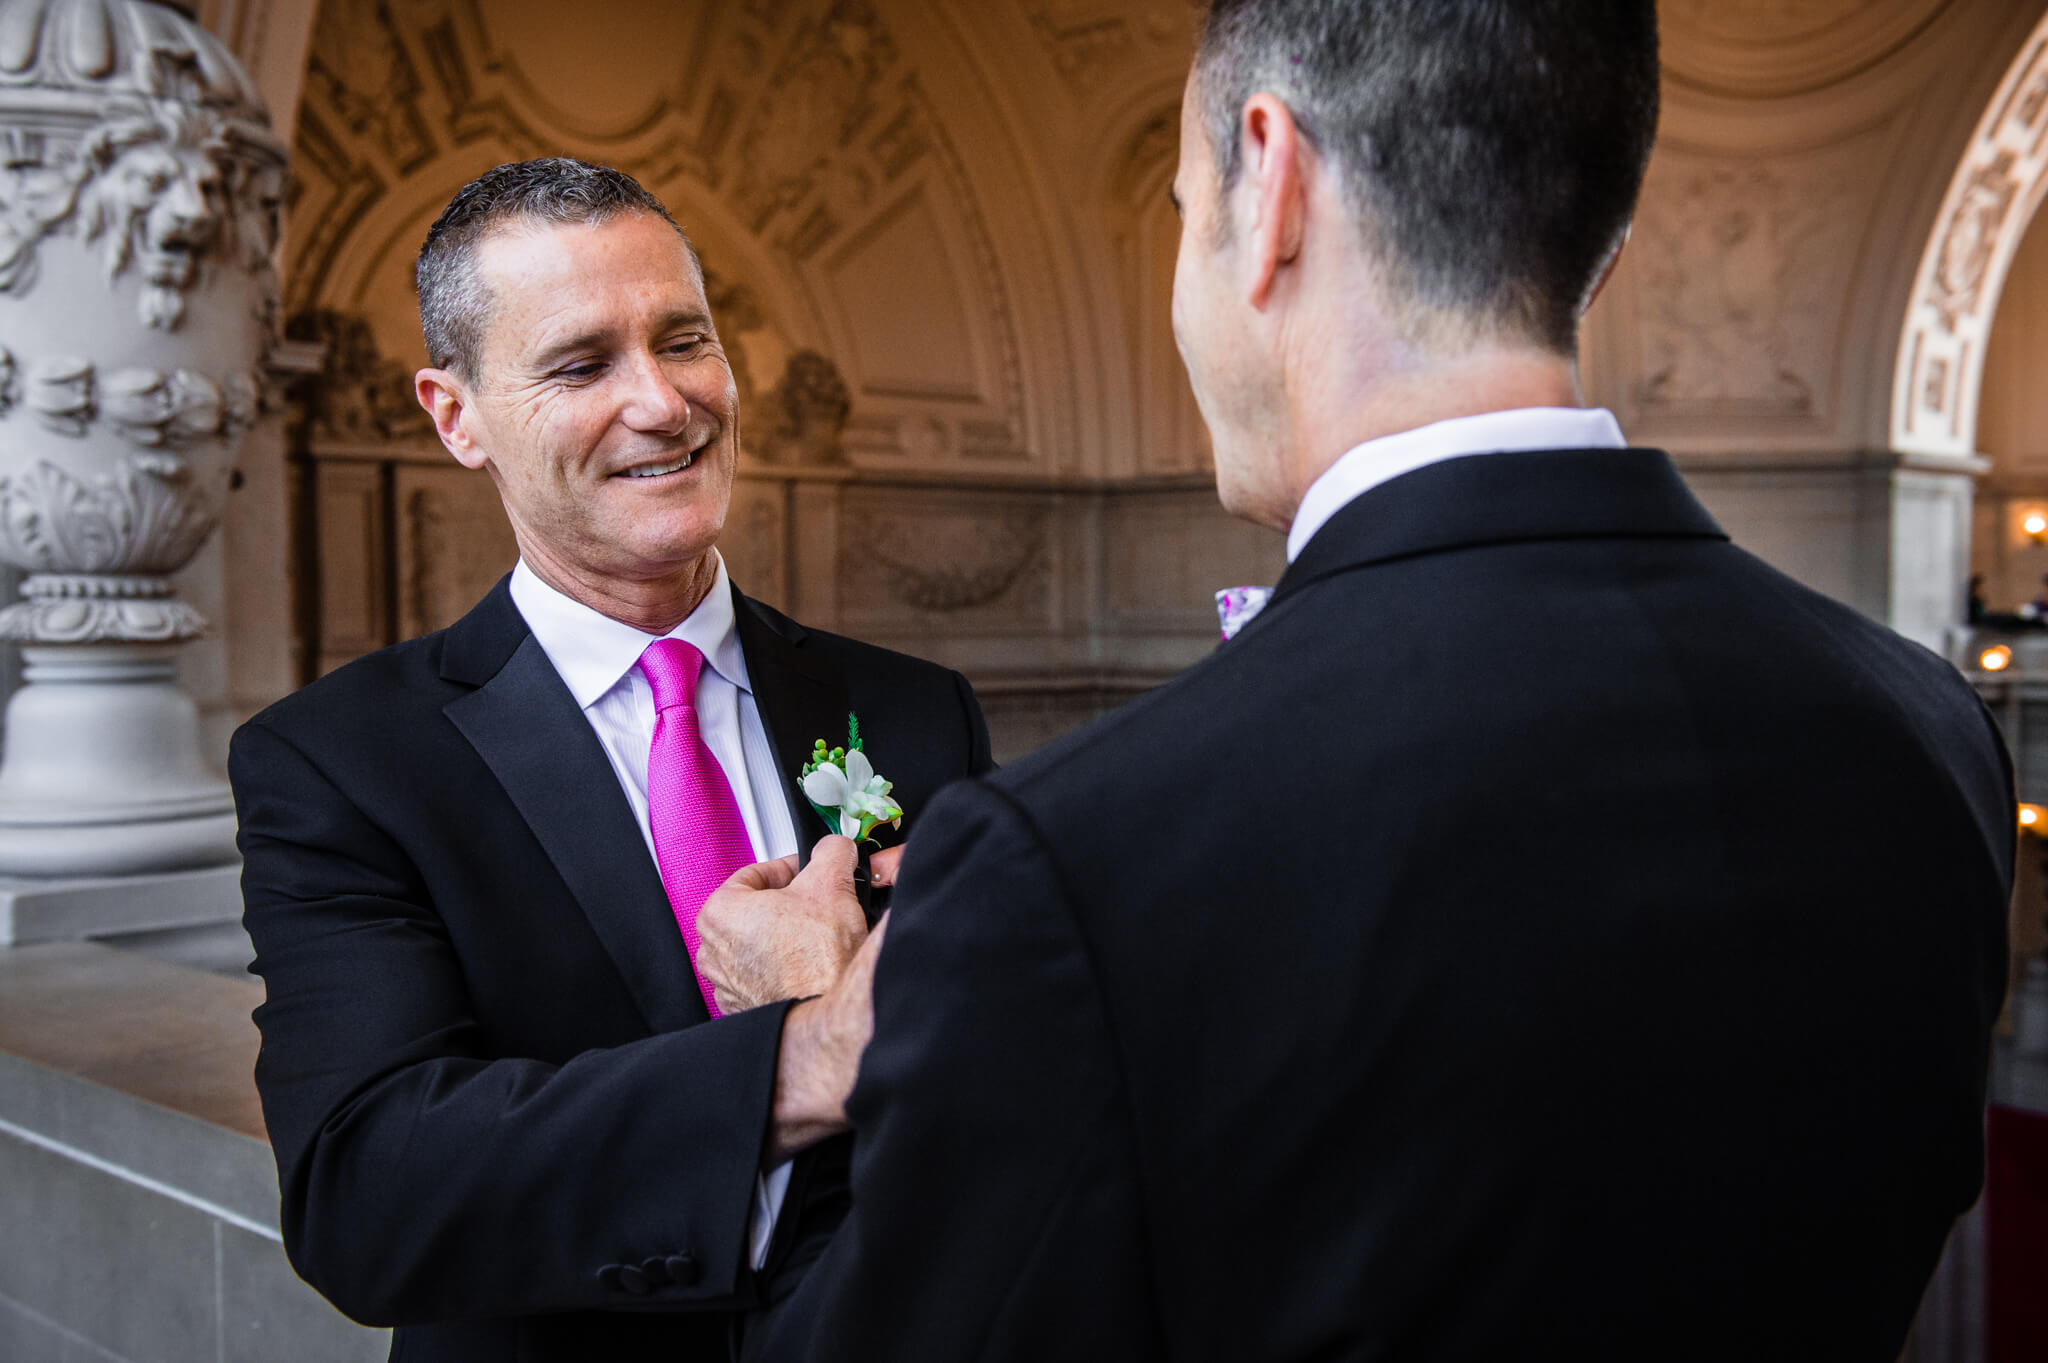 Two men help fasten each other's boutonniere before wedding ceremony